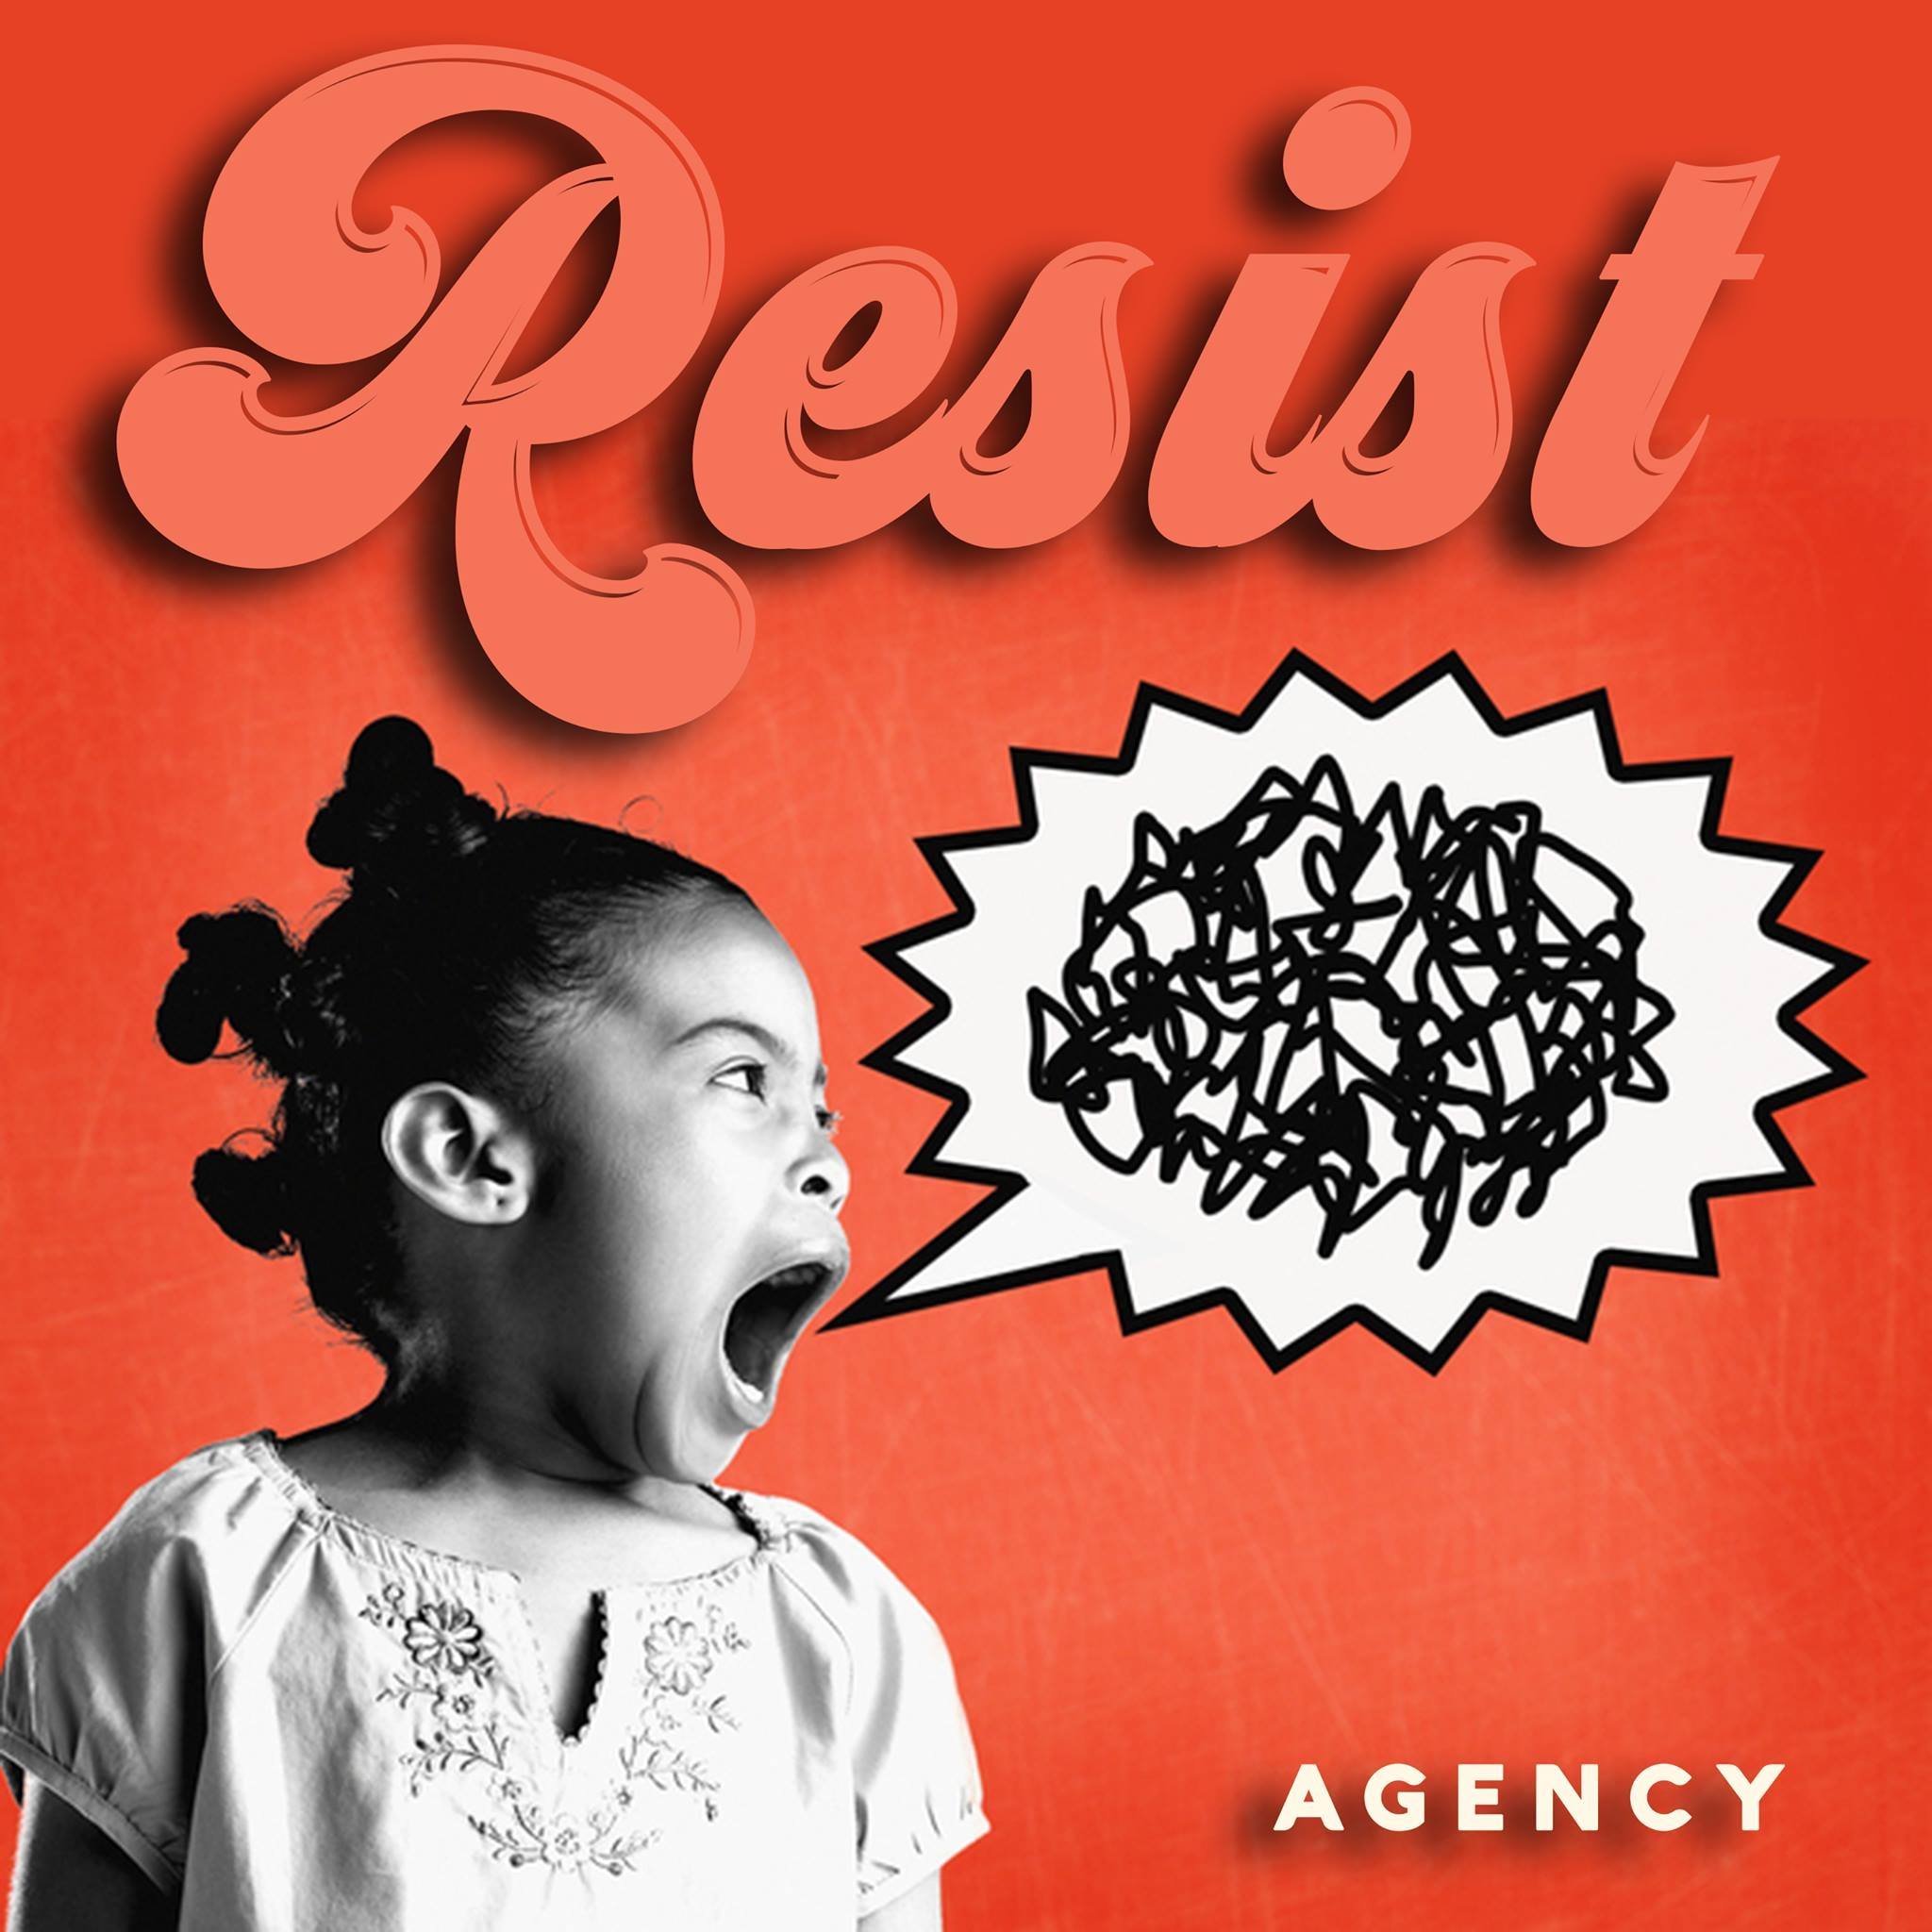 Resist album is now available from Agency.